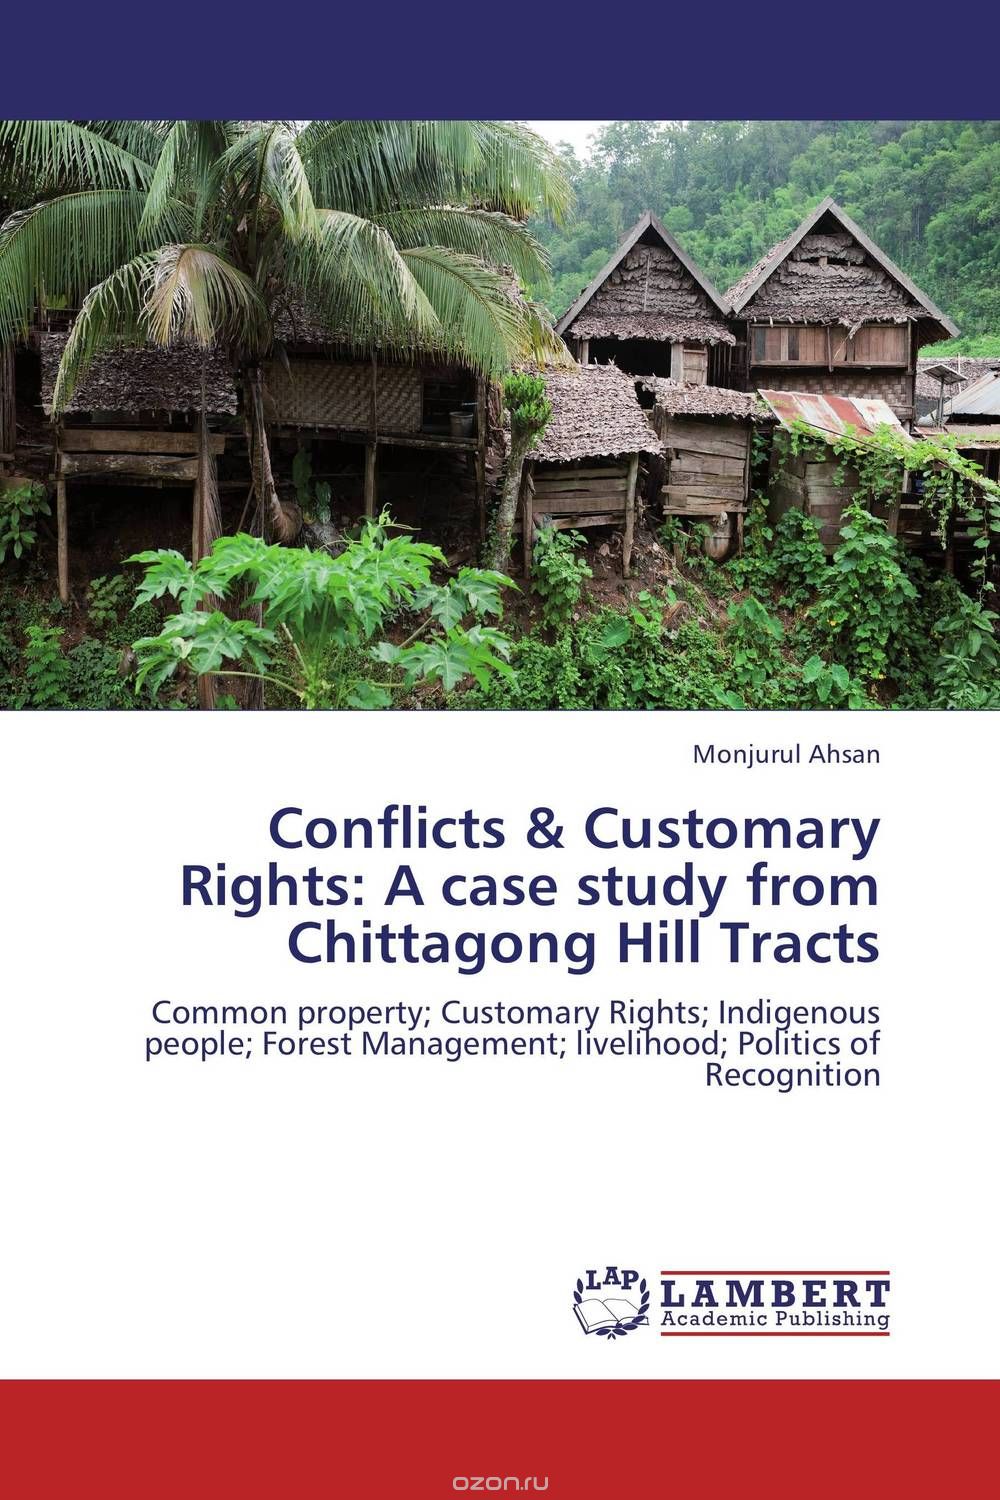 Скачать книгу "Conflicts & Customary Rights: A case study from Chittagong Hill Tracts"